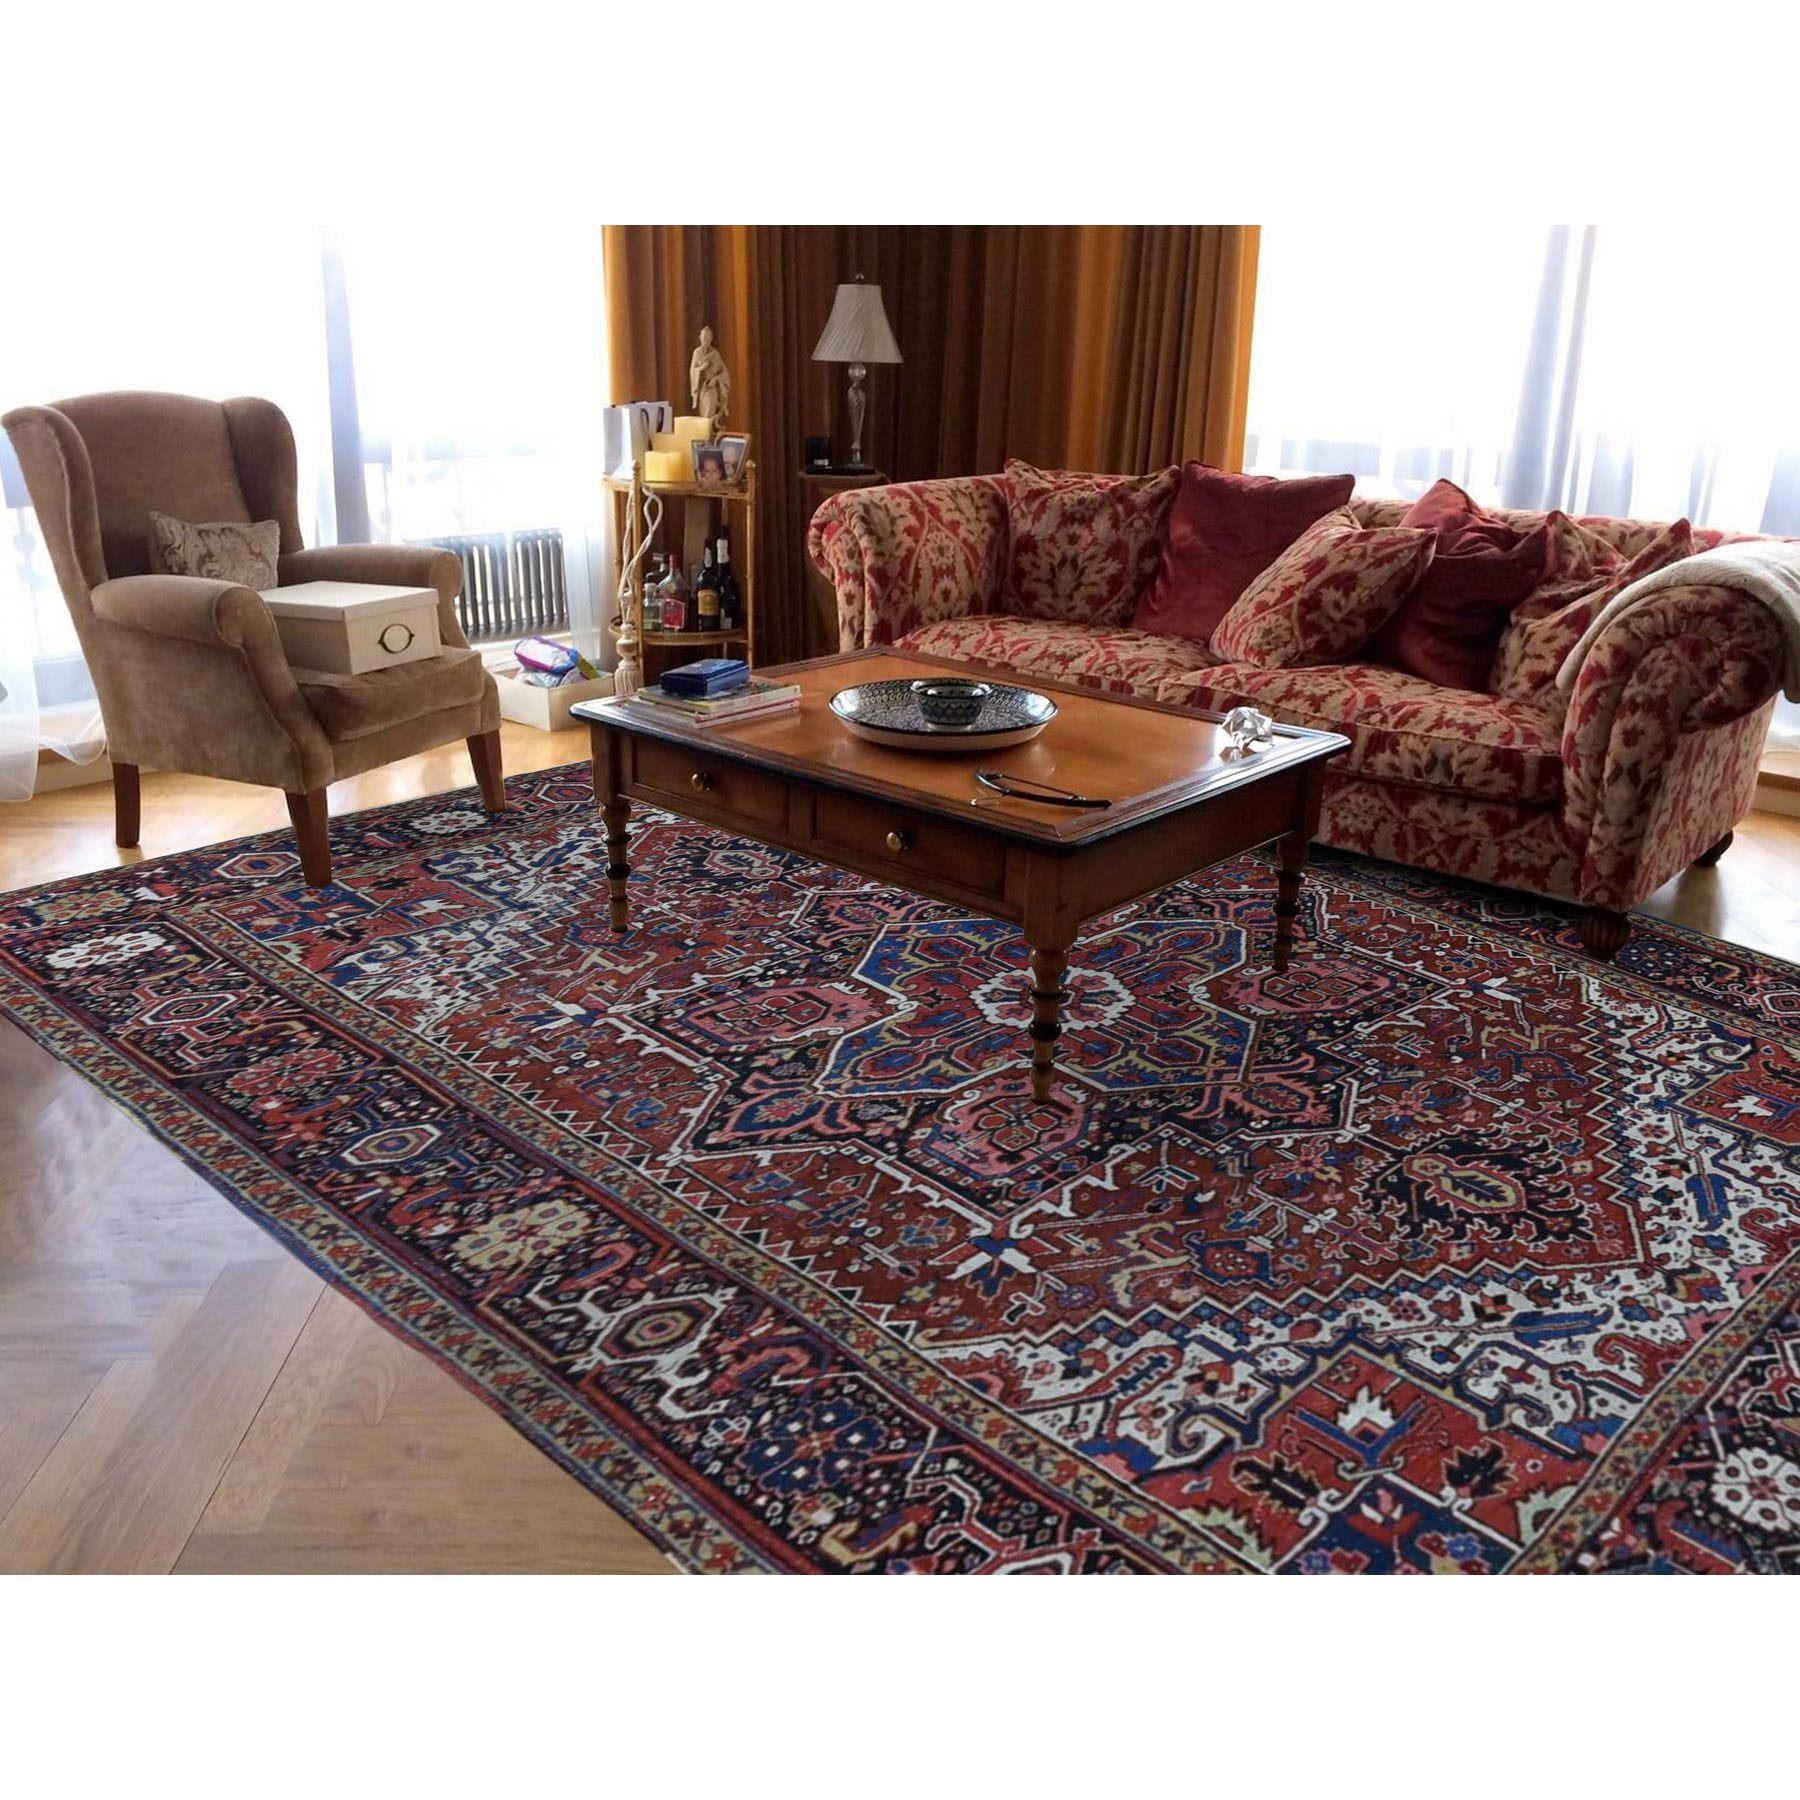 This fabulous Hand-Knotted carpet has been created and designed for extra strength and durability. This rug has been handcrafted for weeks in the traditional method that is used to make
Exact Rug Size in Feet and Inches : 8'6